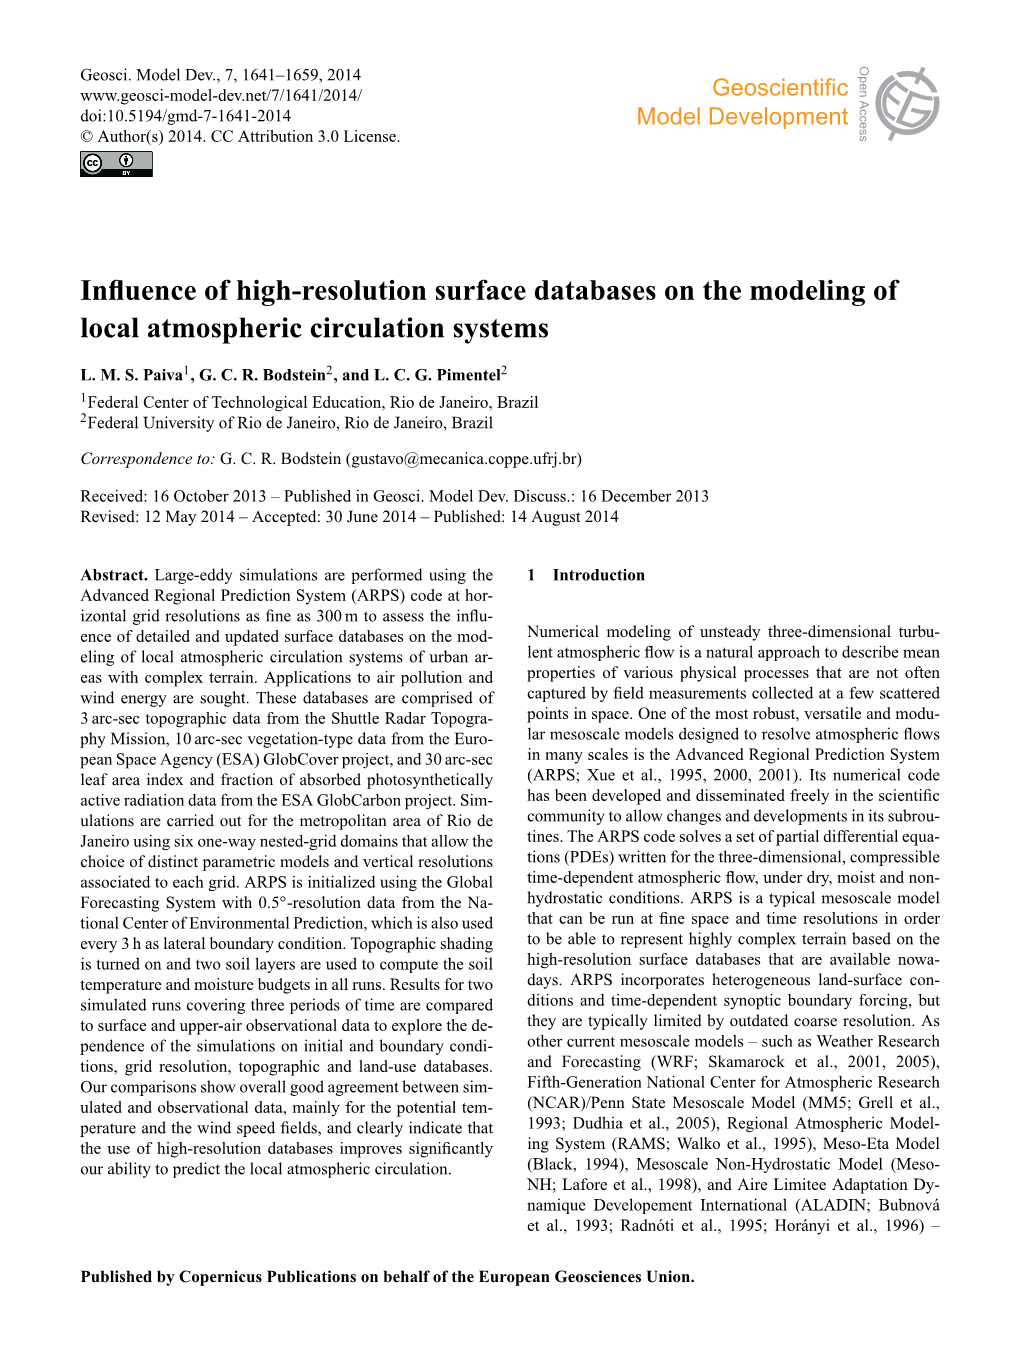 Influence of High-Resolution Surface Databases on the Modeling of Local